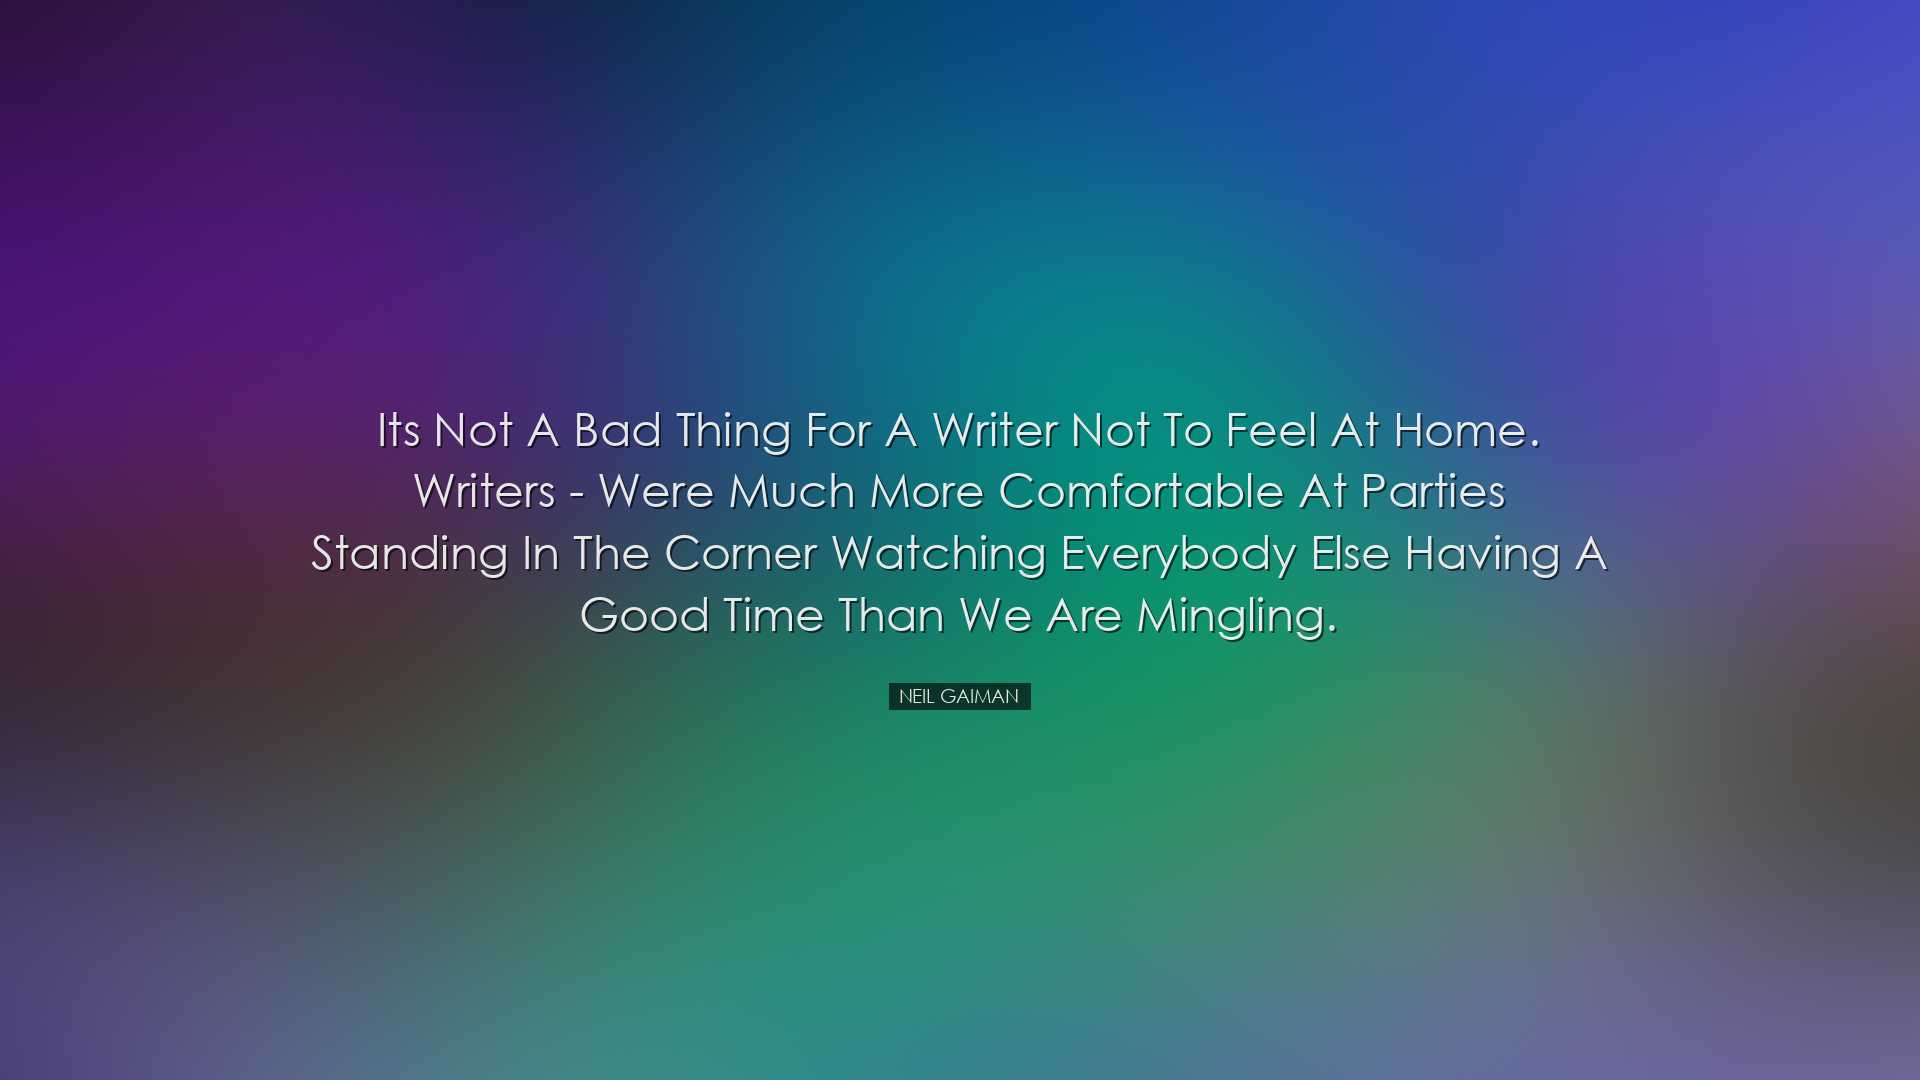 Its not a bad thing for a writer not to feel at home. Writers - we